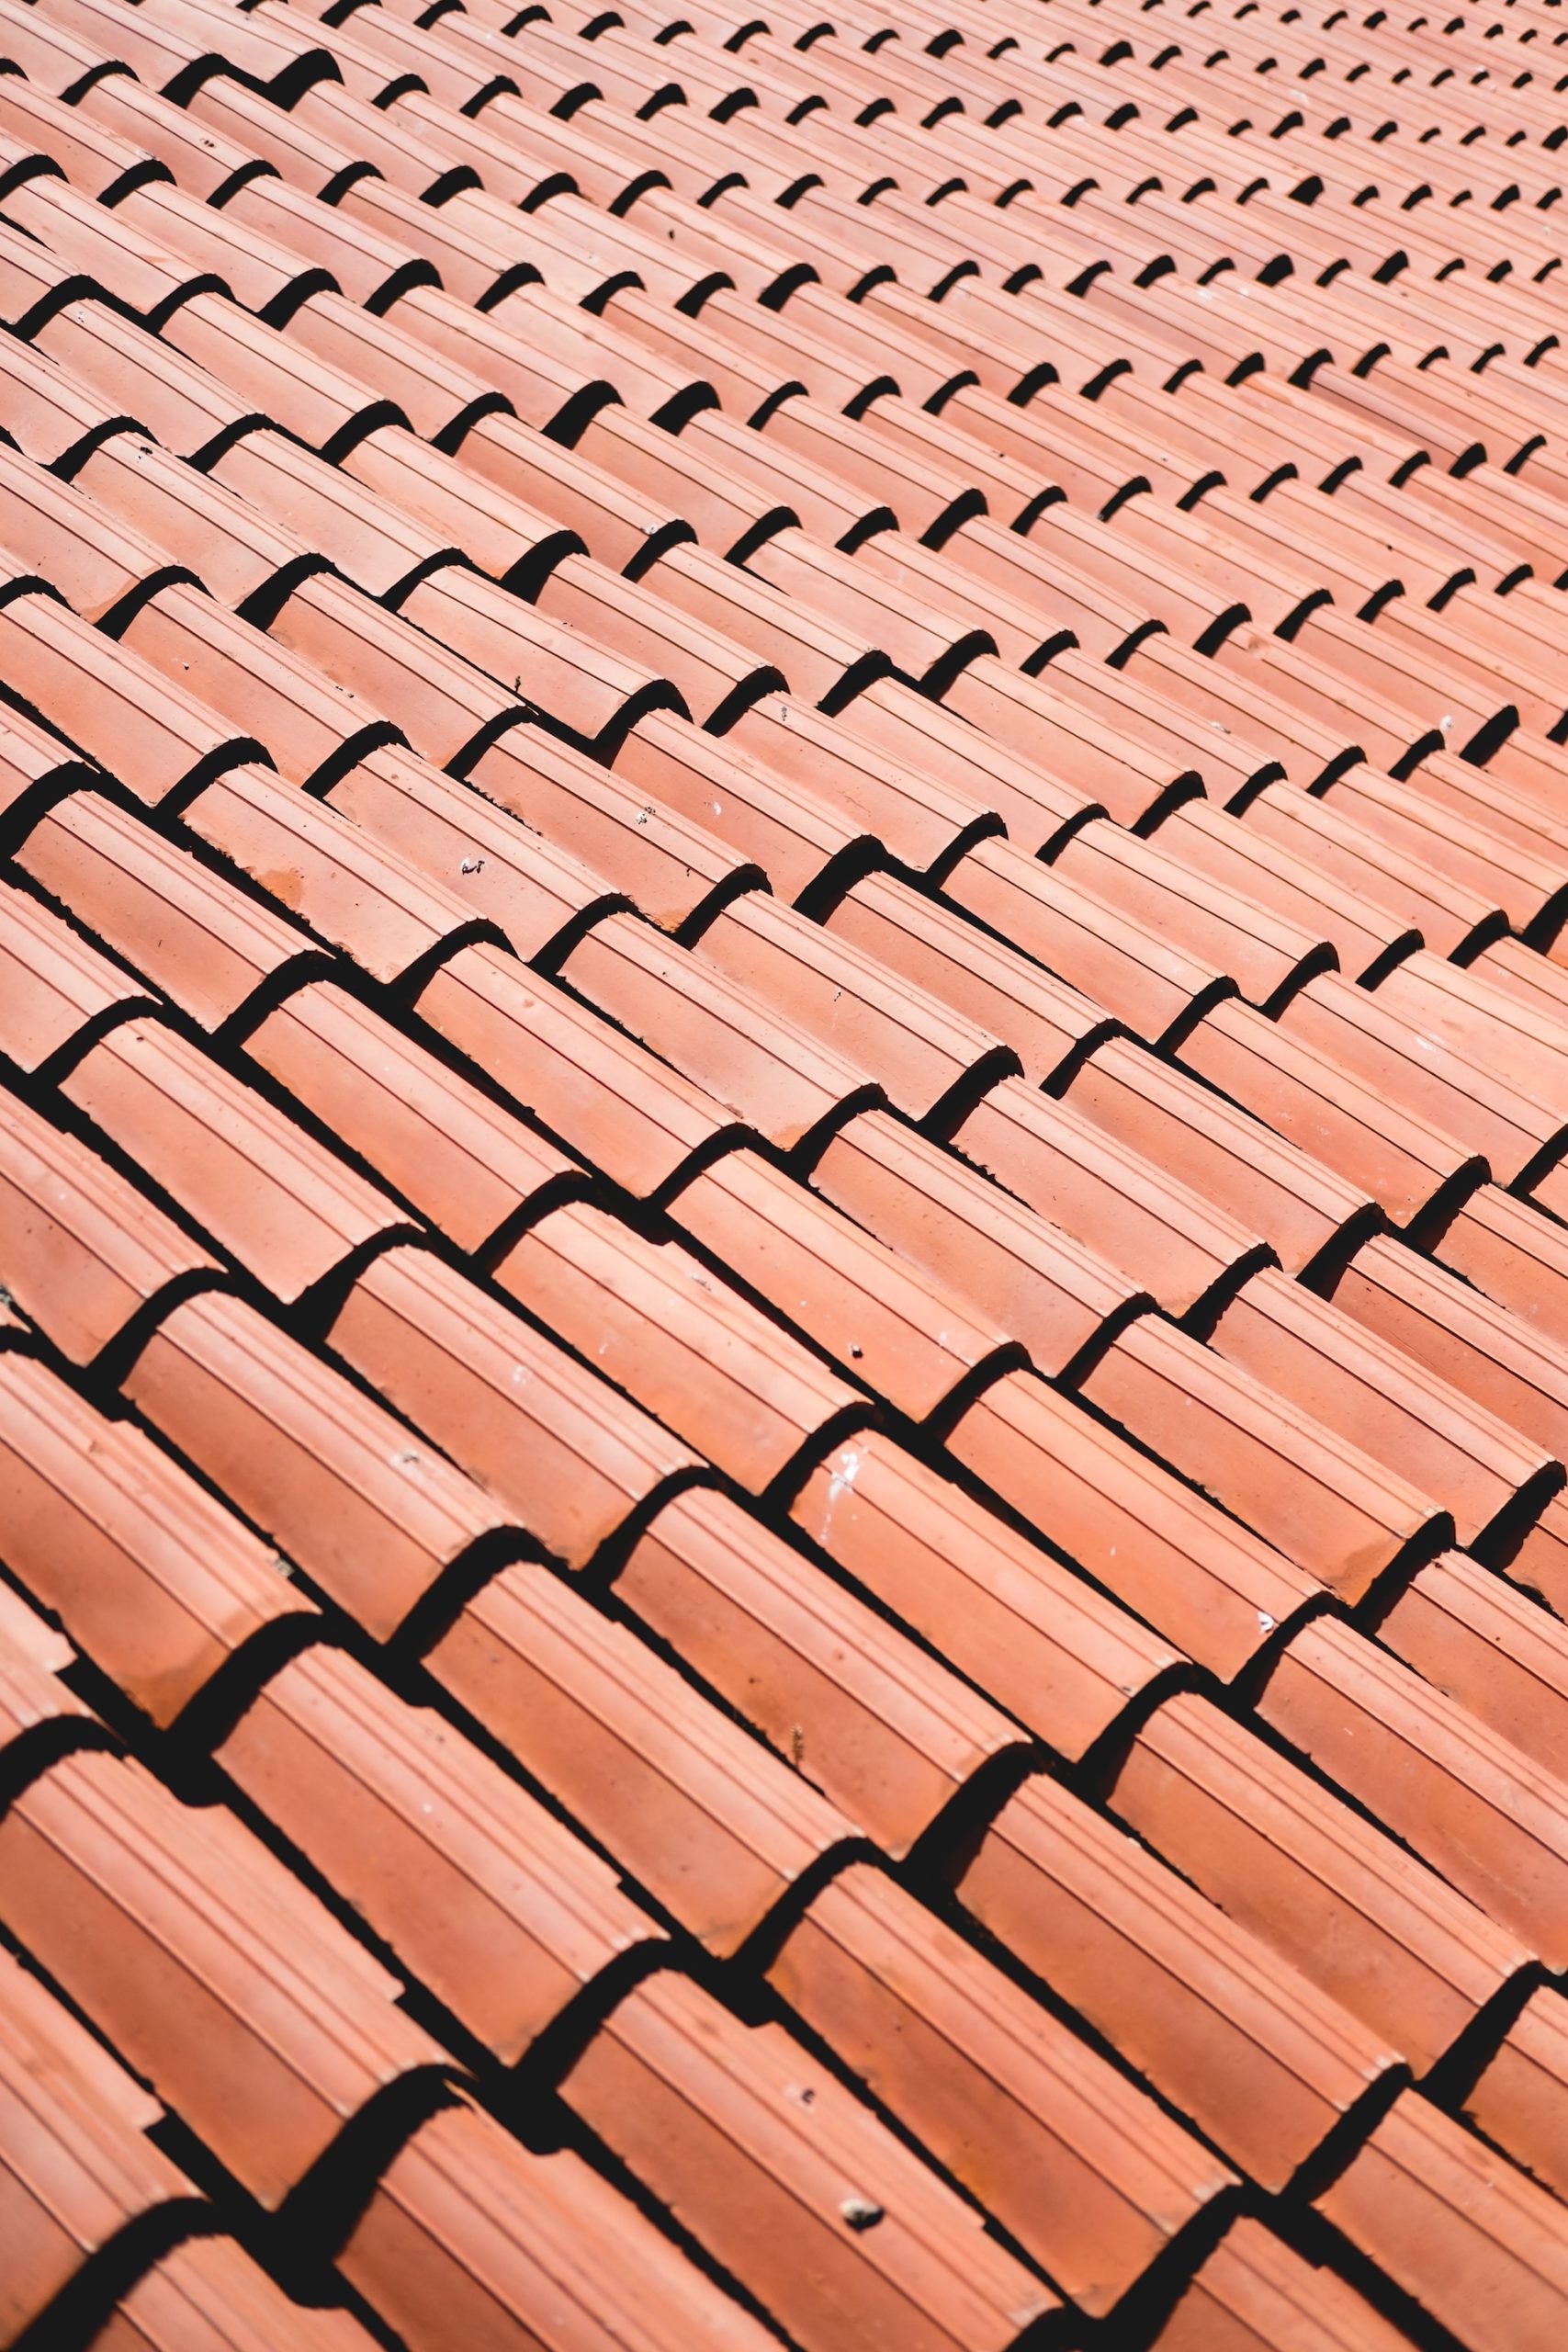 Common Warning Signs of Roof Problems